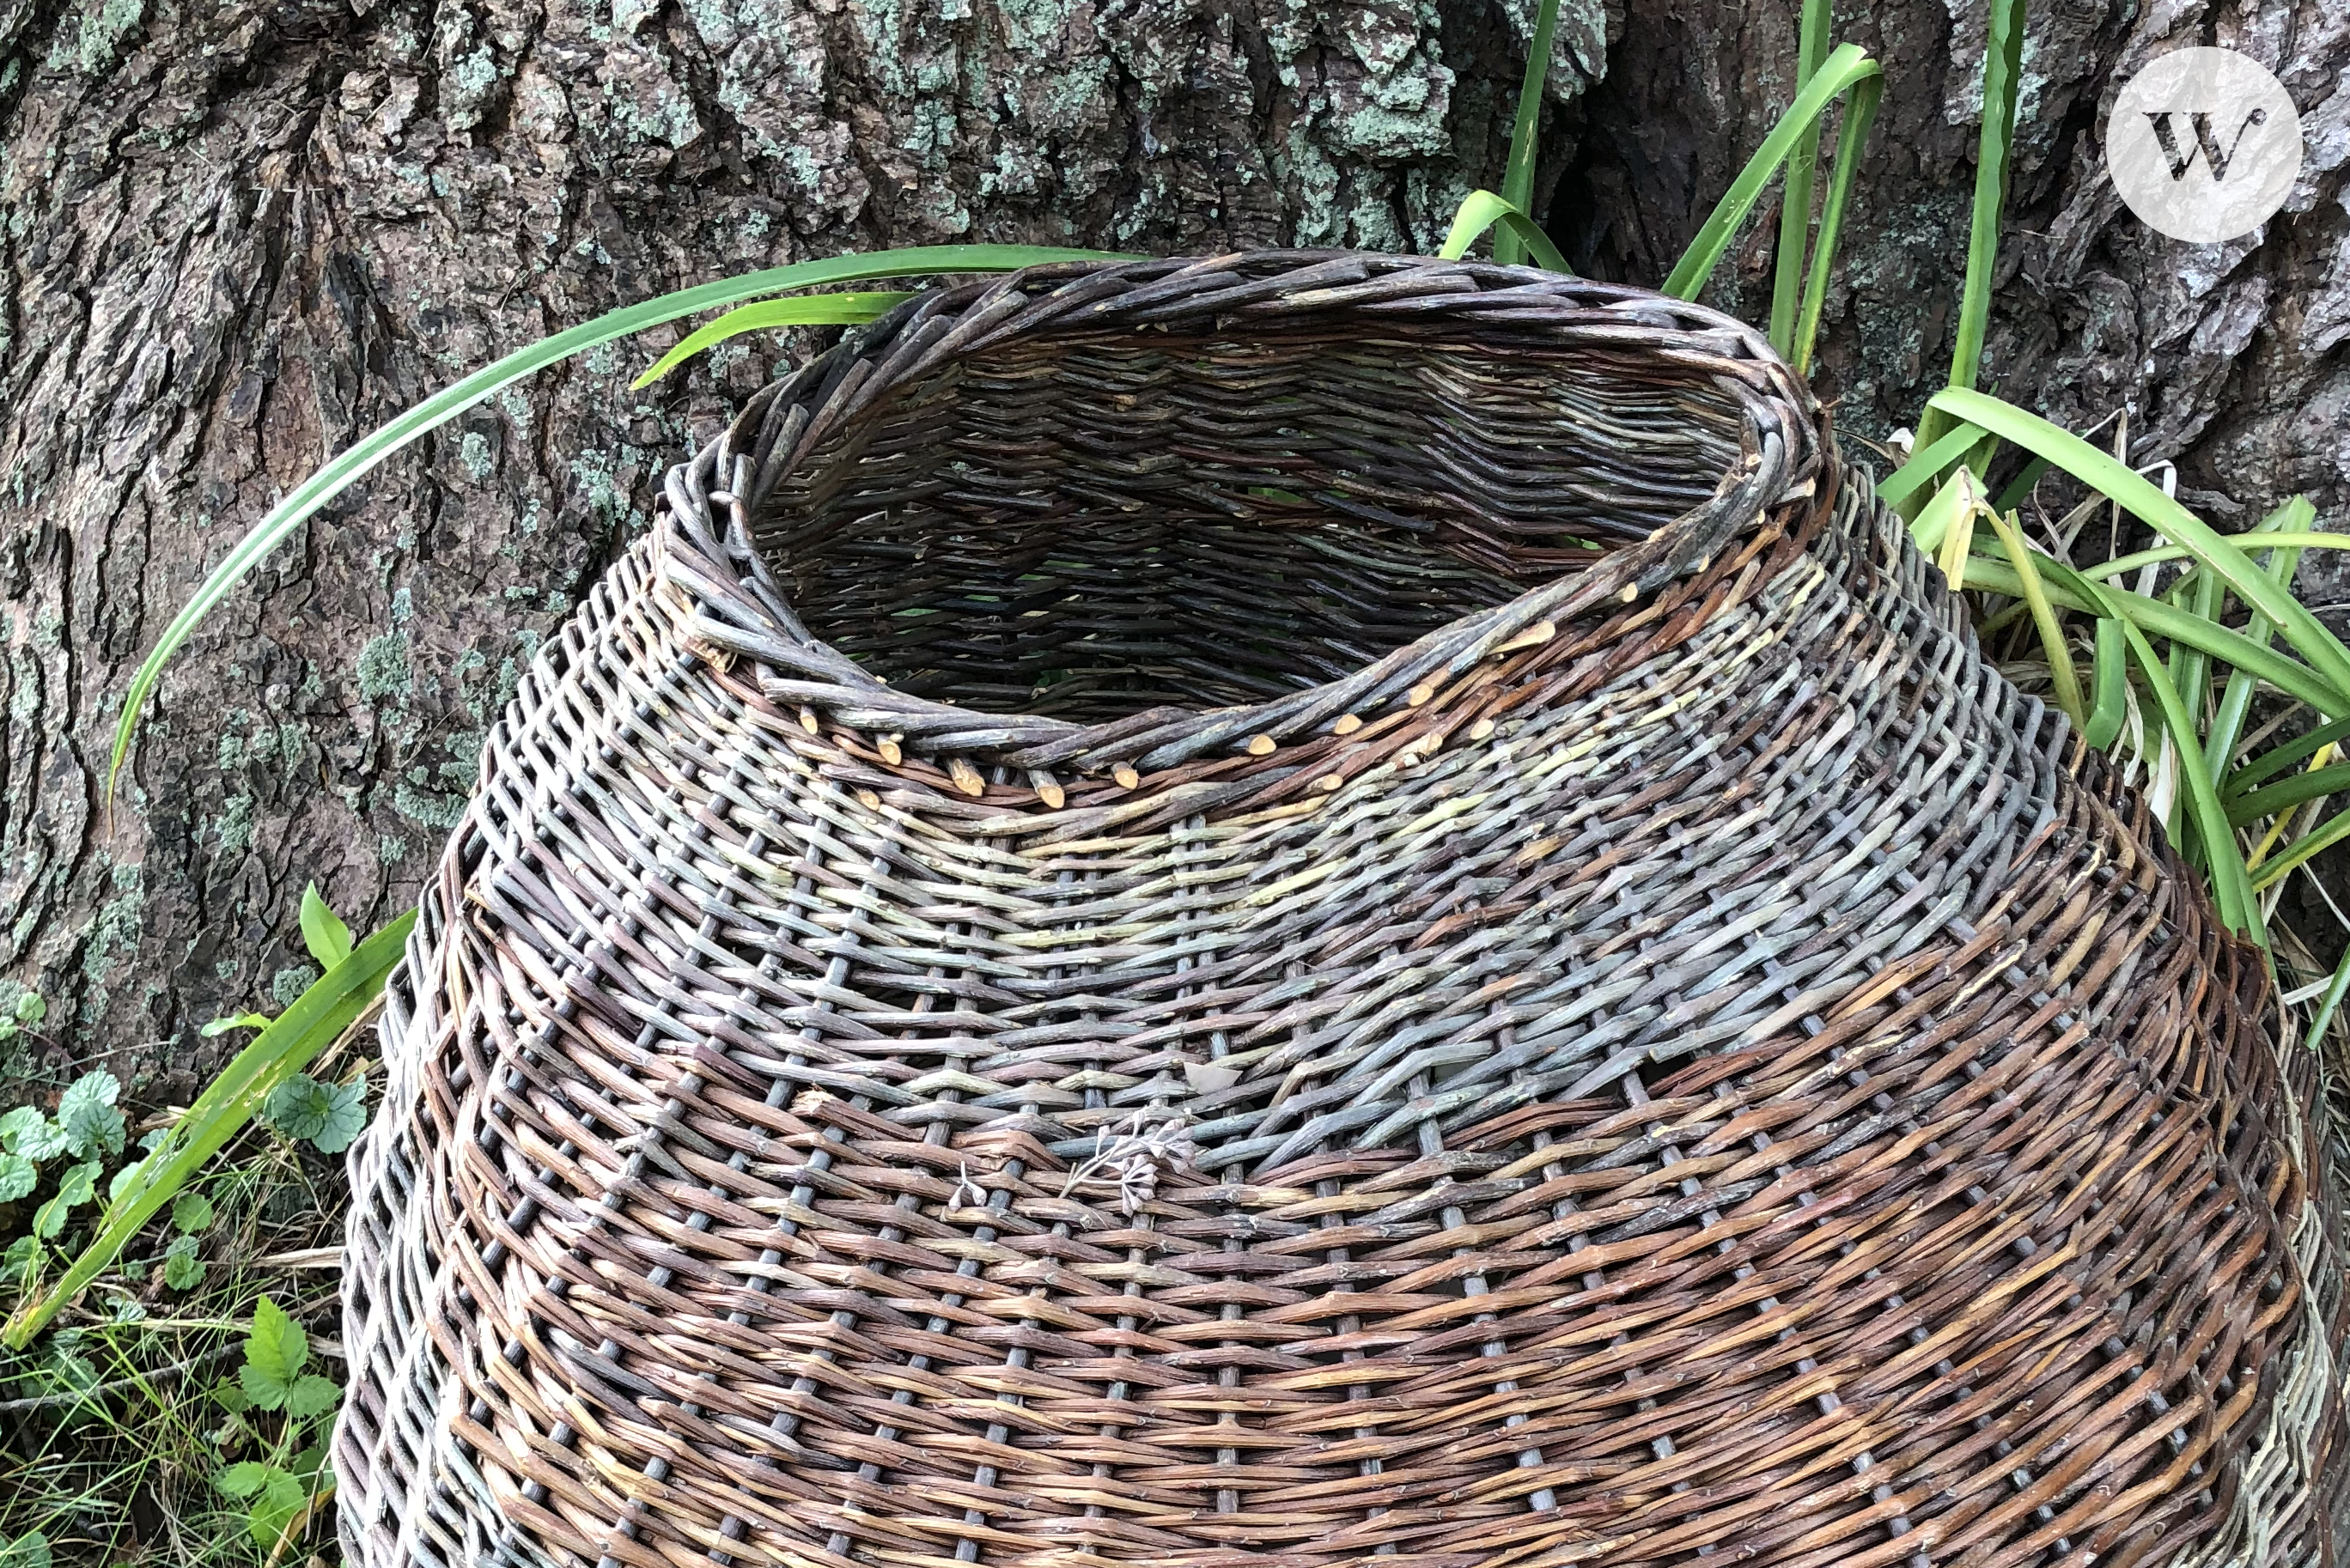 A photograph of a willow basket against a tree.